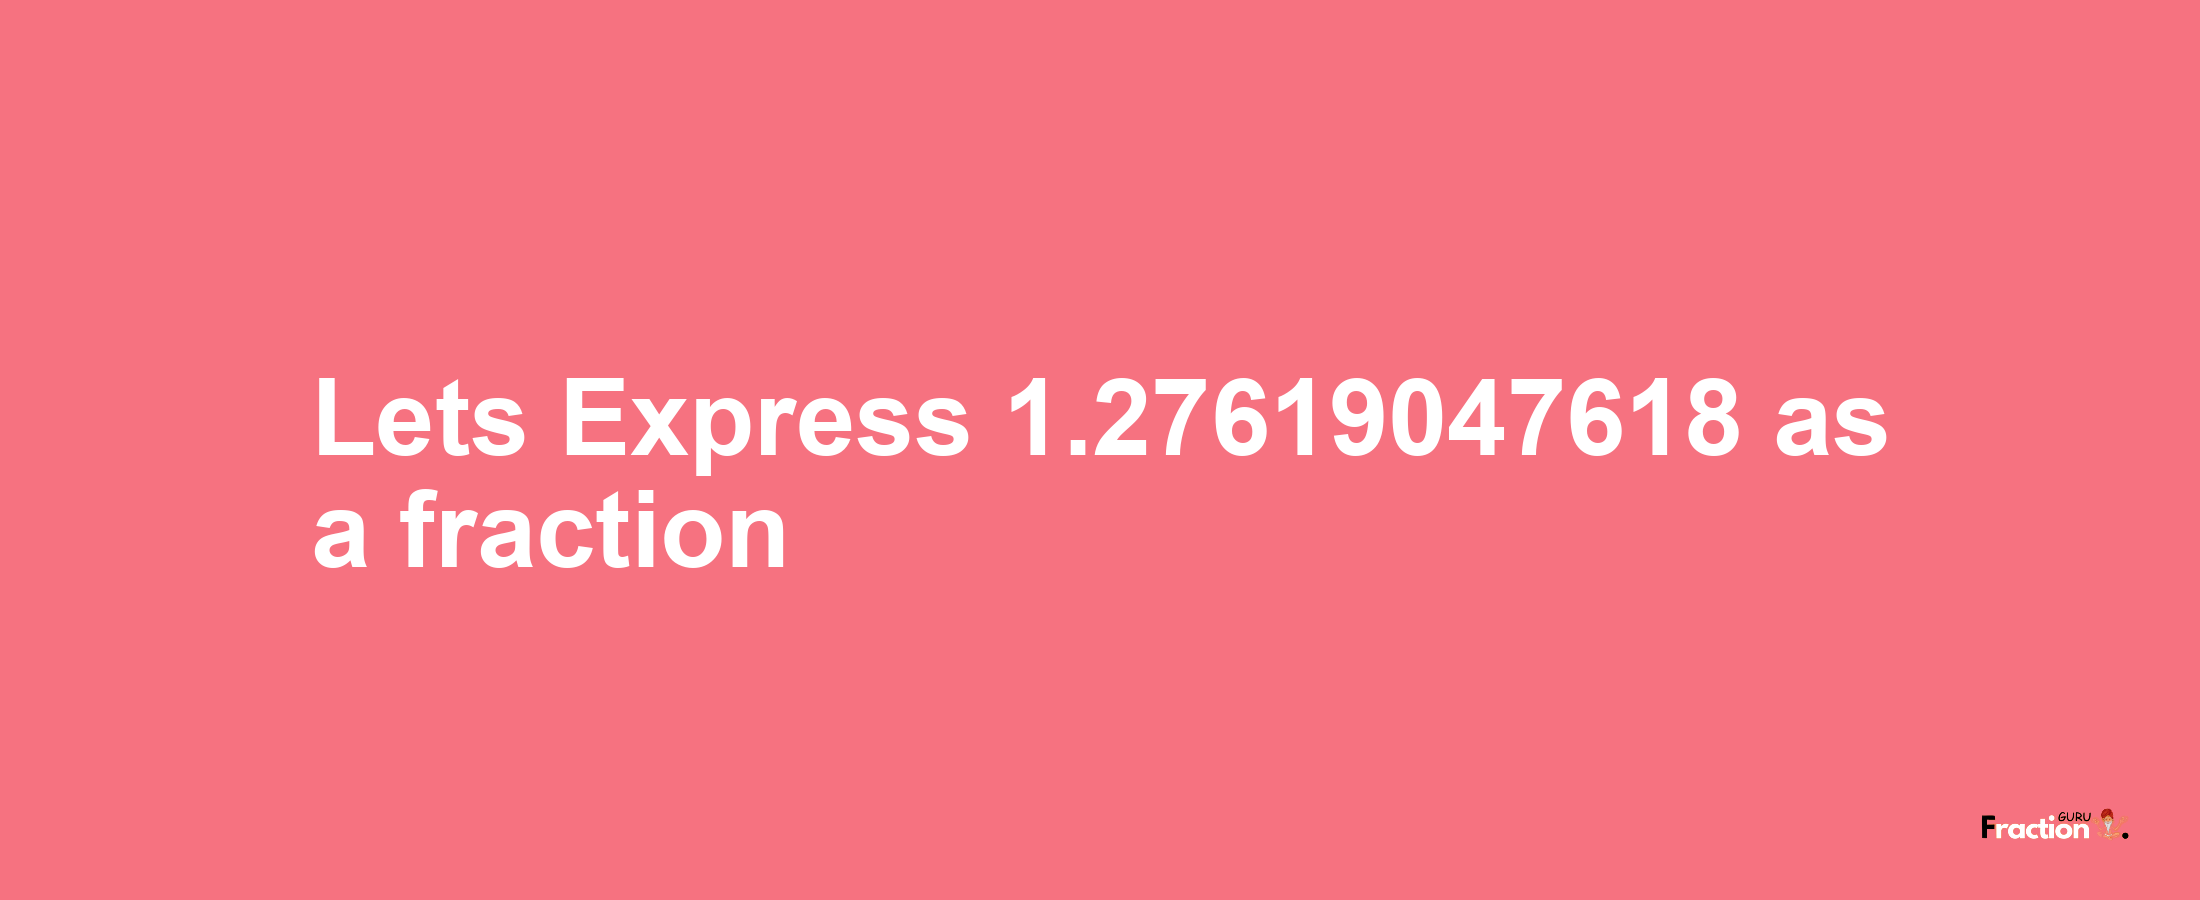 Lets Express 1.27619047618 as afraction